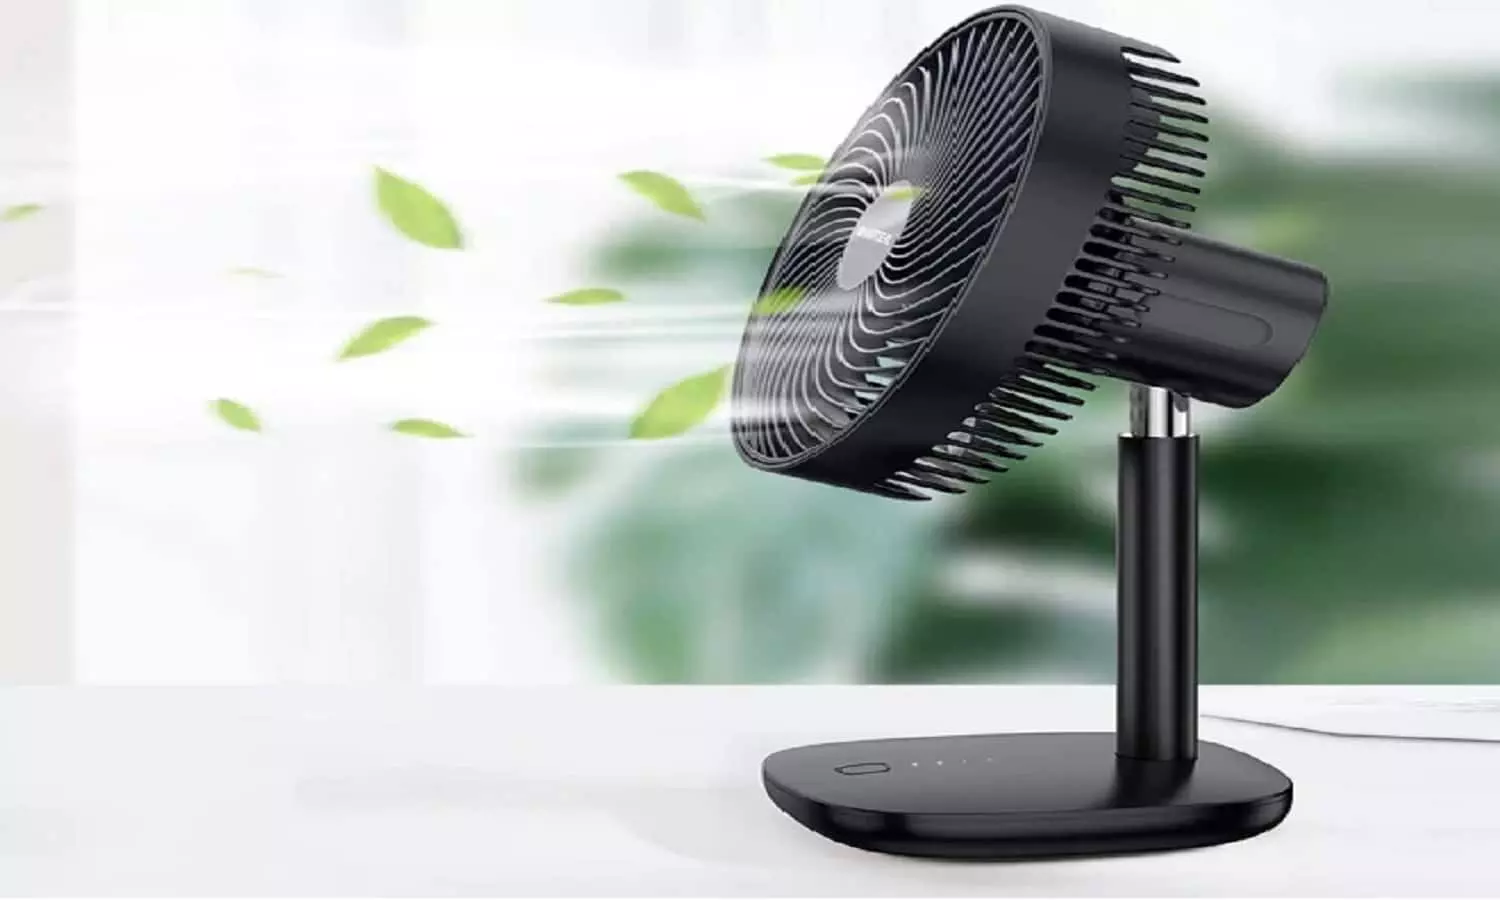 Battery Fan: गर्म हवा को करेगा कूल, बिना बिजली के 15 घंटे चलेगा ये पंखा |  Battery Fan: Will cool the hot air, this fan will run for 15 hours without  electricity